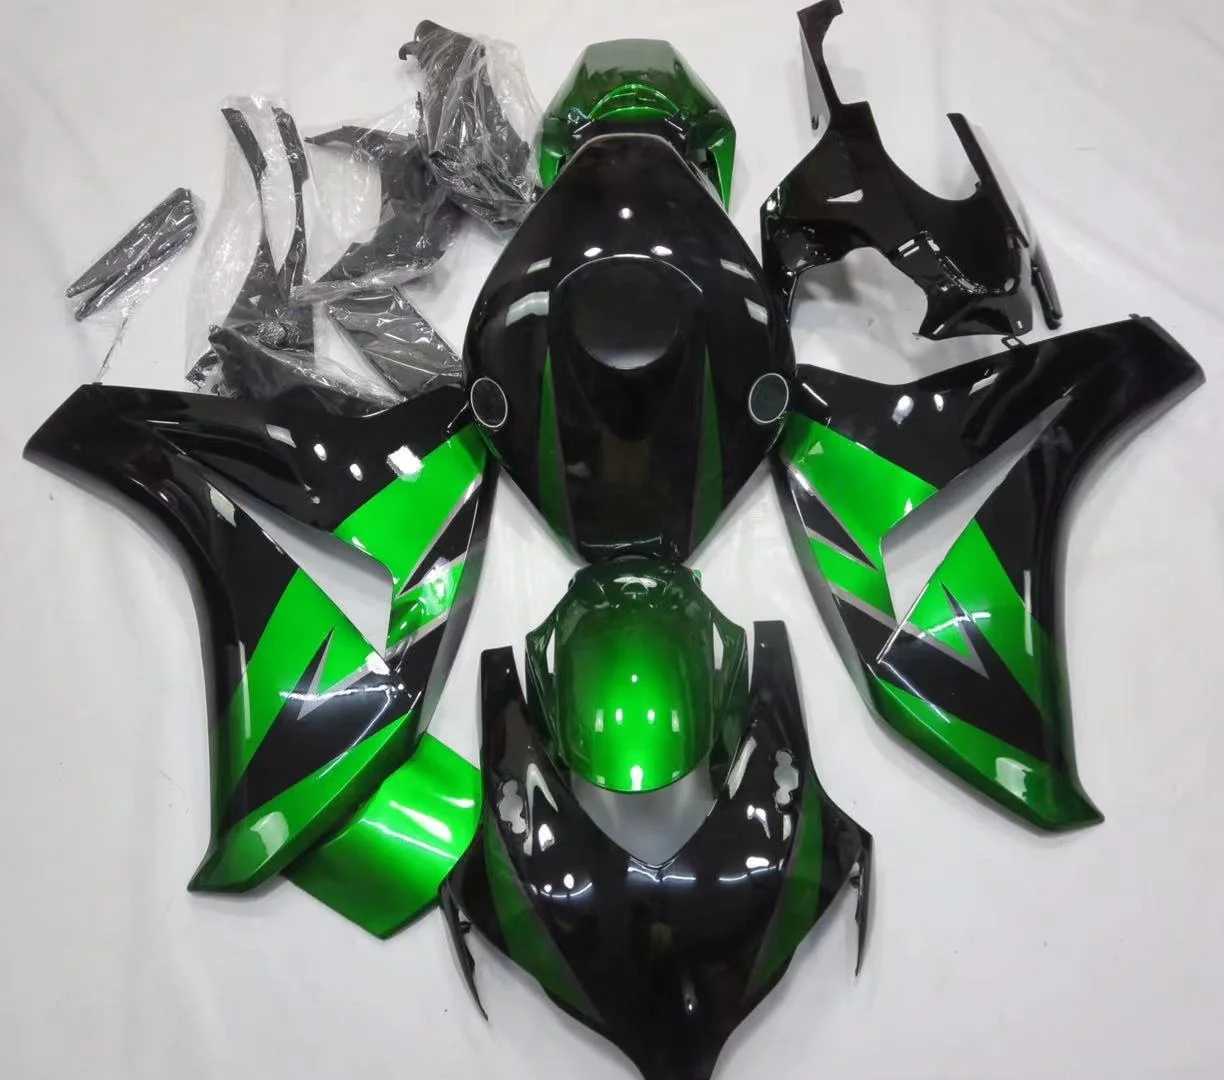 

2021 WHSC Motorcycle Fairing Body Kit For HONDA CBR1000 2008-2011 green blue black, Pictures shown